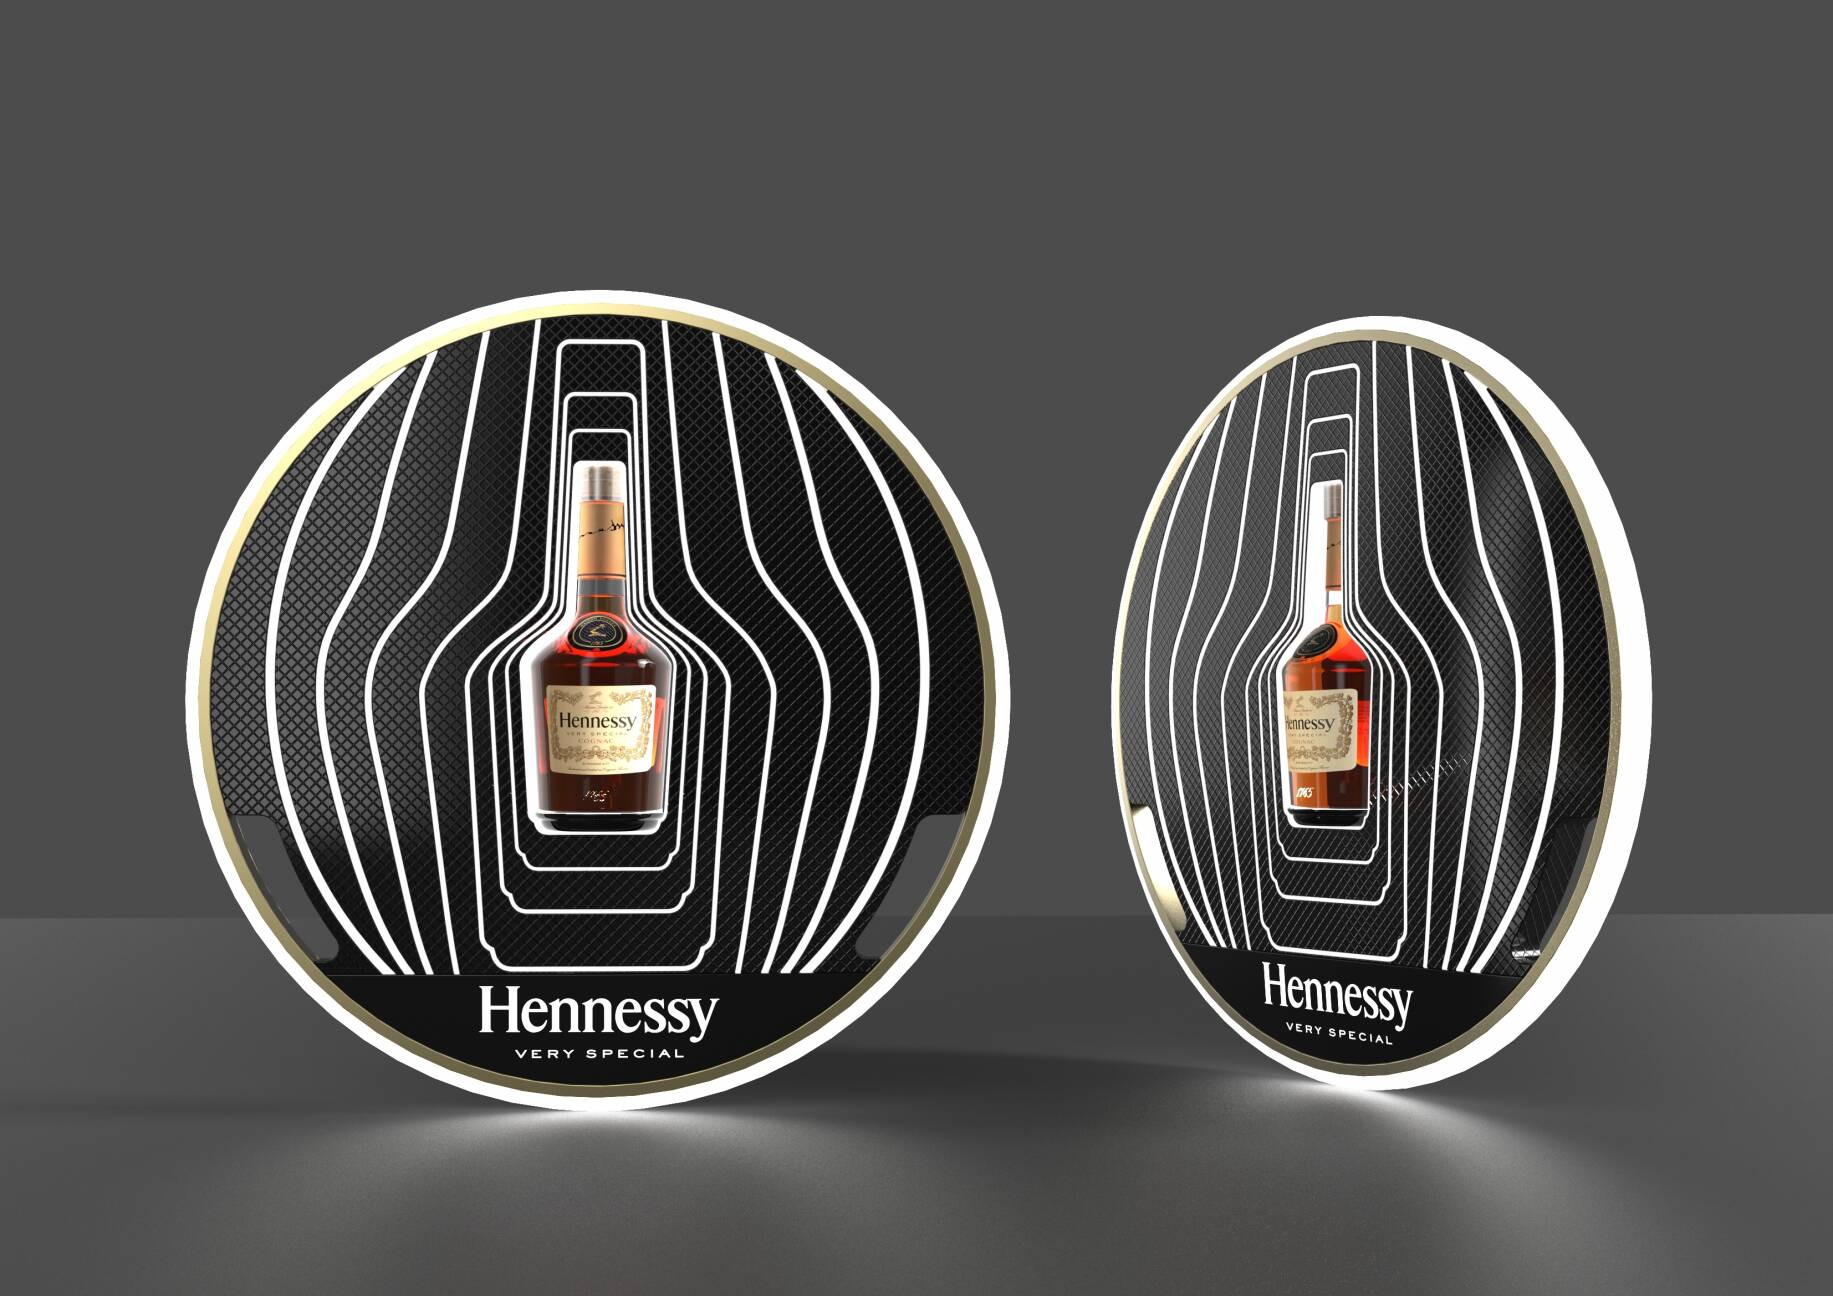 LVMH Wines & Spirits Q3 boosted by Hennessy - The Spirits Business